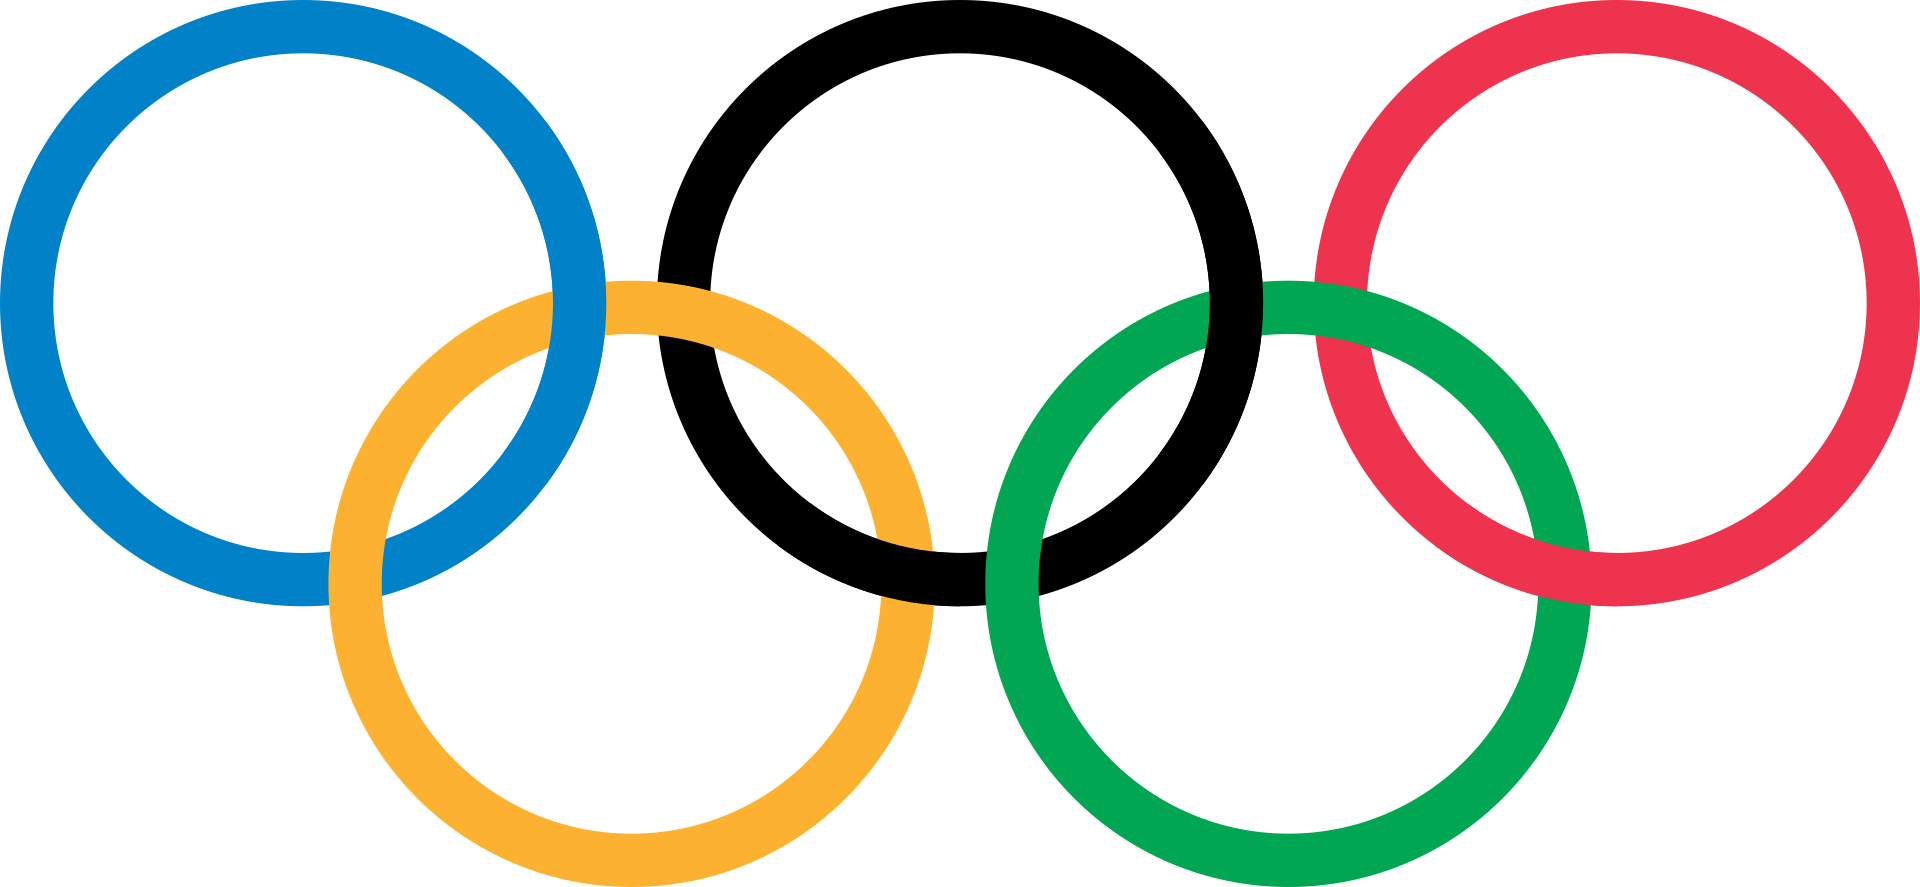 1920px-Olympic_rings_without_rims.svg